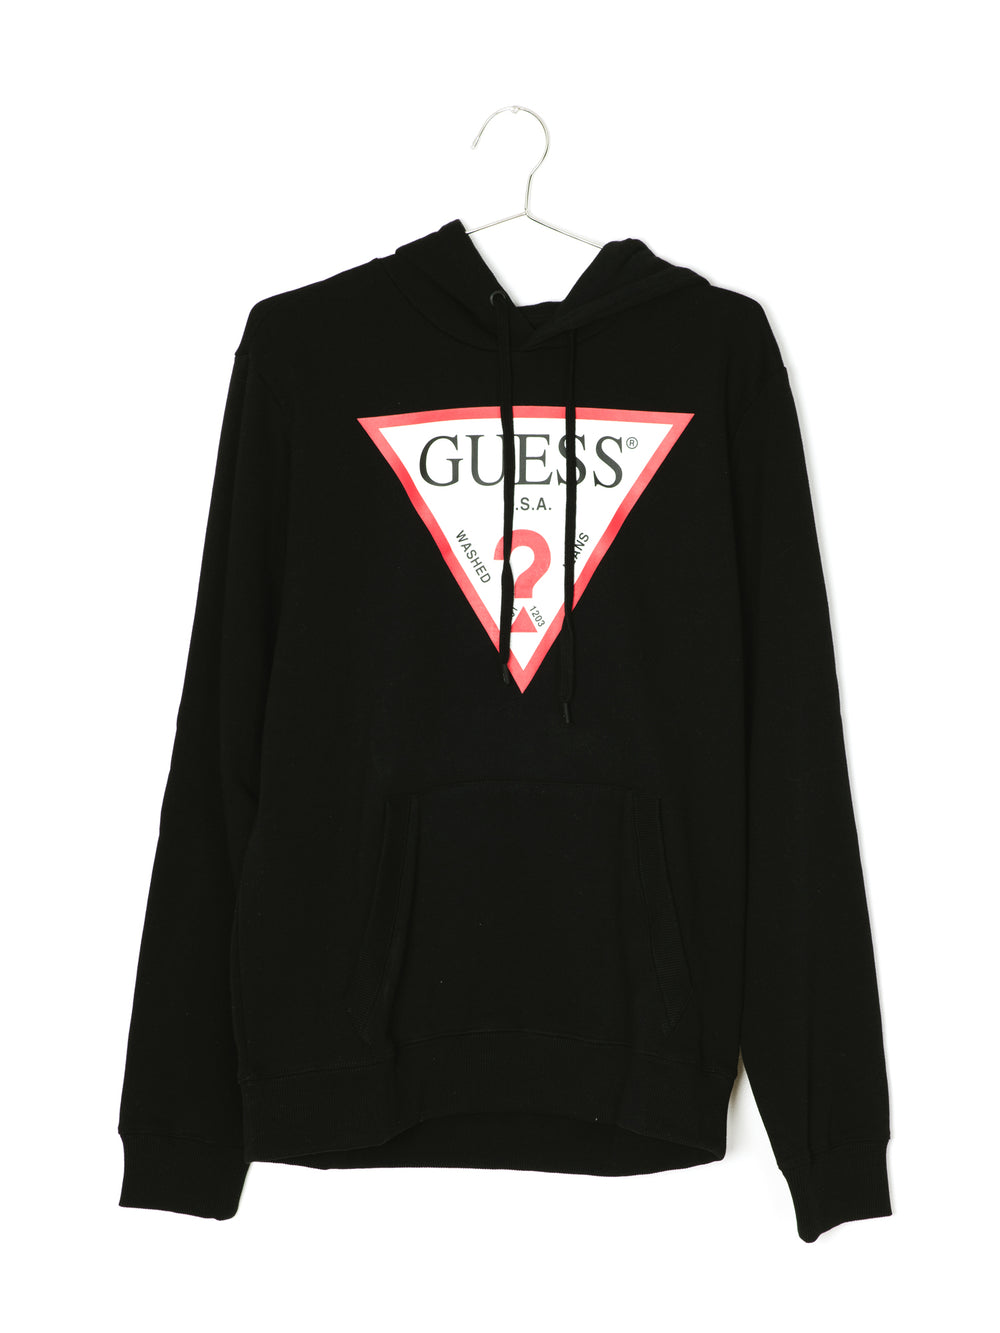 GUESS ECO ROY TRIANGLE LOGO PULLOVER HOODIE  - CLEARANCE